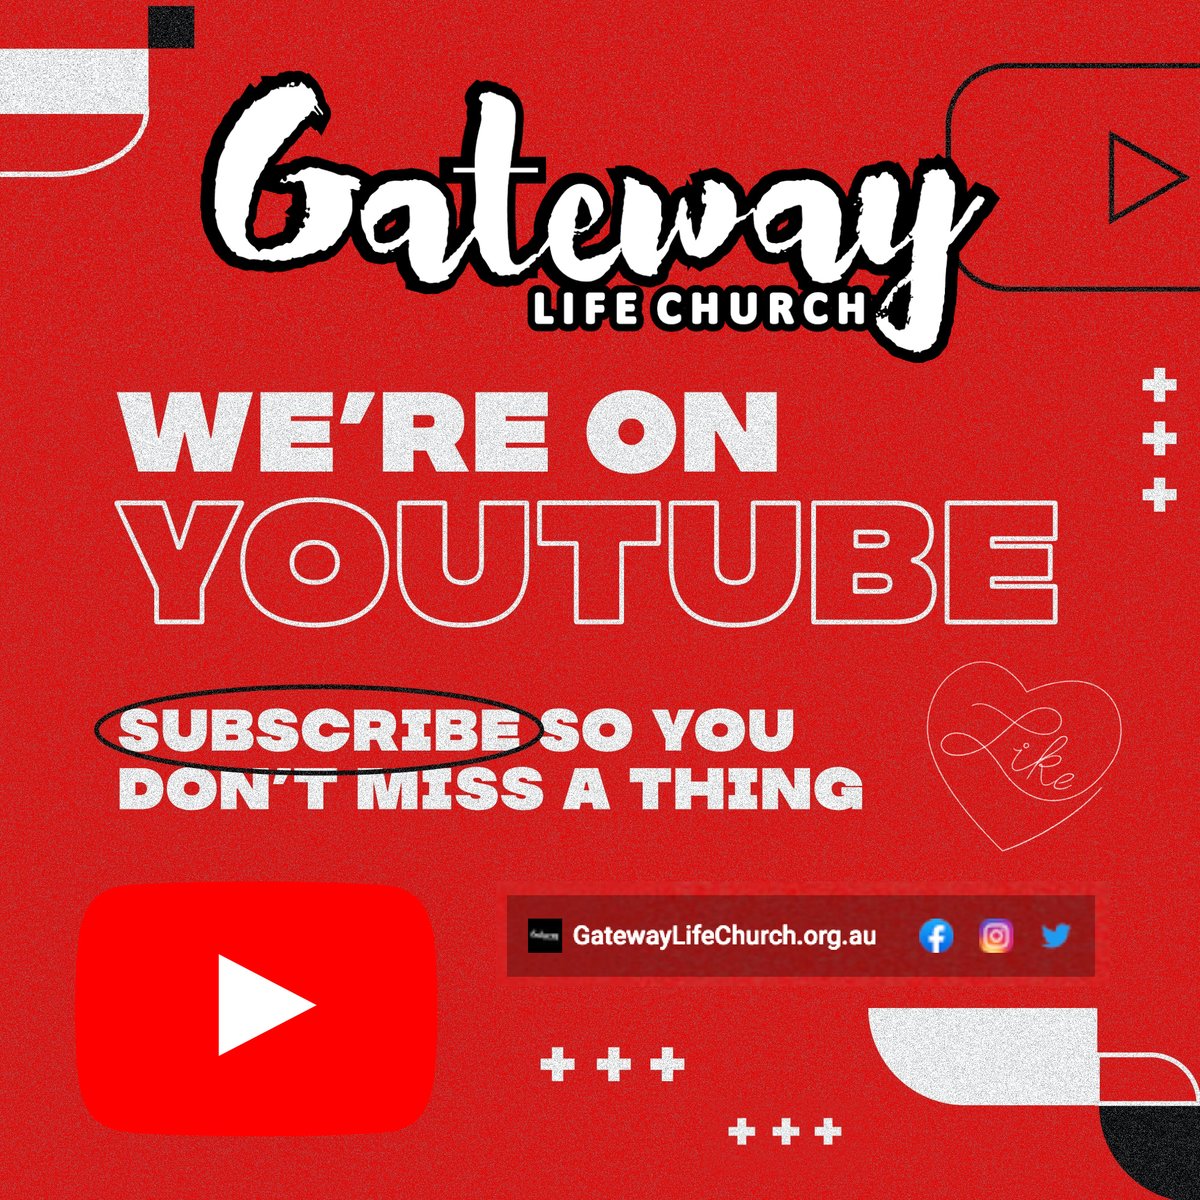 📺 👀🔴▶️
Gateway Life Church #YouTube
youtube.com/watch?v=_xqZe4…
#Subscribe ✔️
#Subscribed ✔️
#Like ✔️
#Comment ✔️
#Share ✔️
Love & Serve, GLC 😊
#AlburyWodonga #Jindera #Africa #India 
#ABC #Nations #Generations #WeAreGLC 
#BeTheChurch #Equip #Encourage #Empower